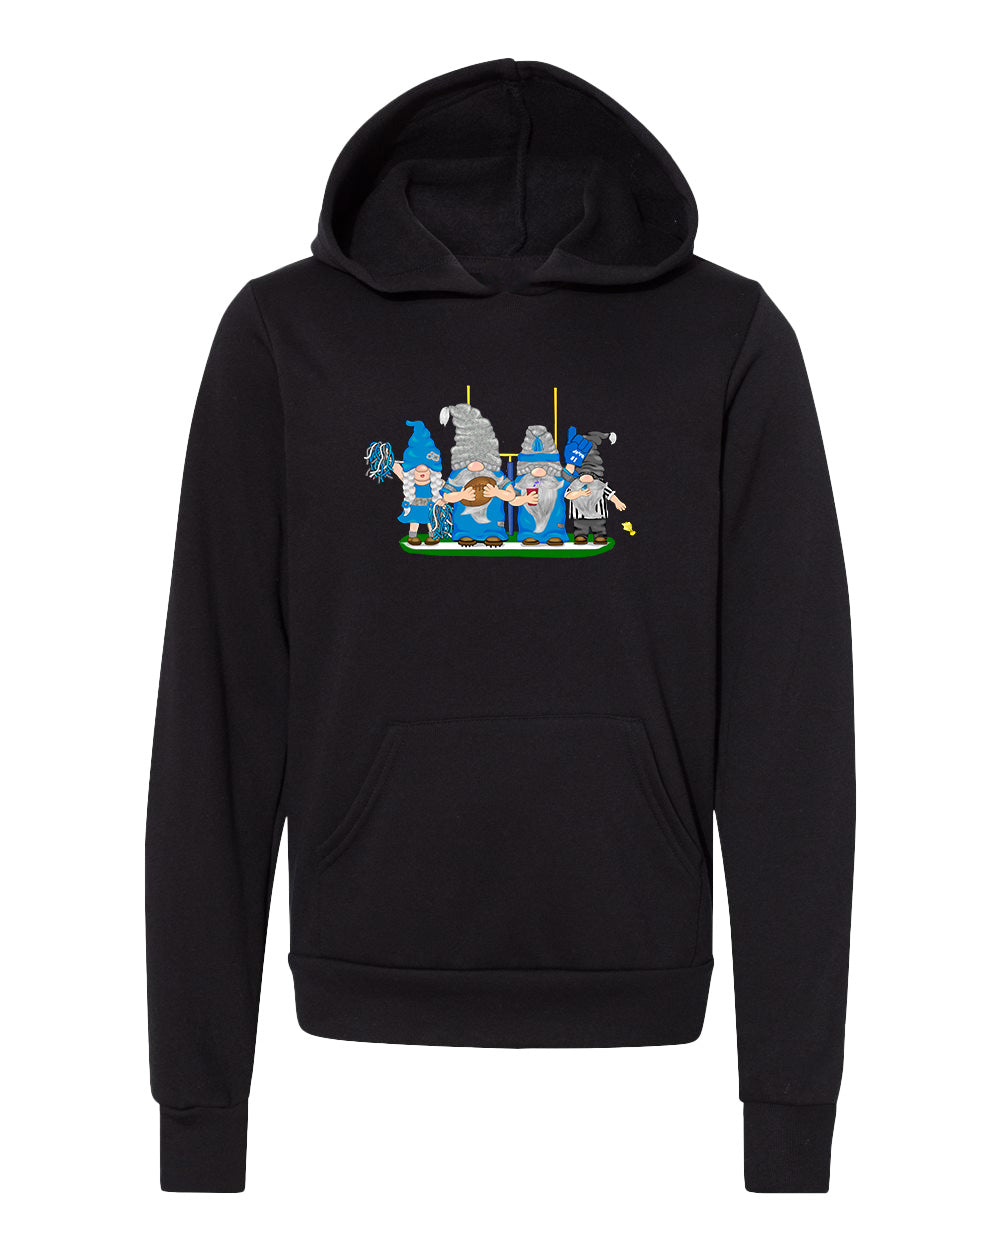 Blue & Silver Football Gnomes  (similar to Detroit) on Kids Hoodie